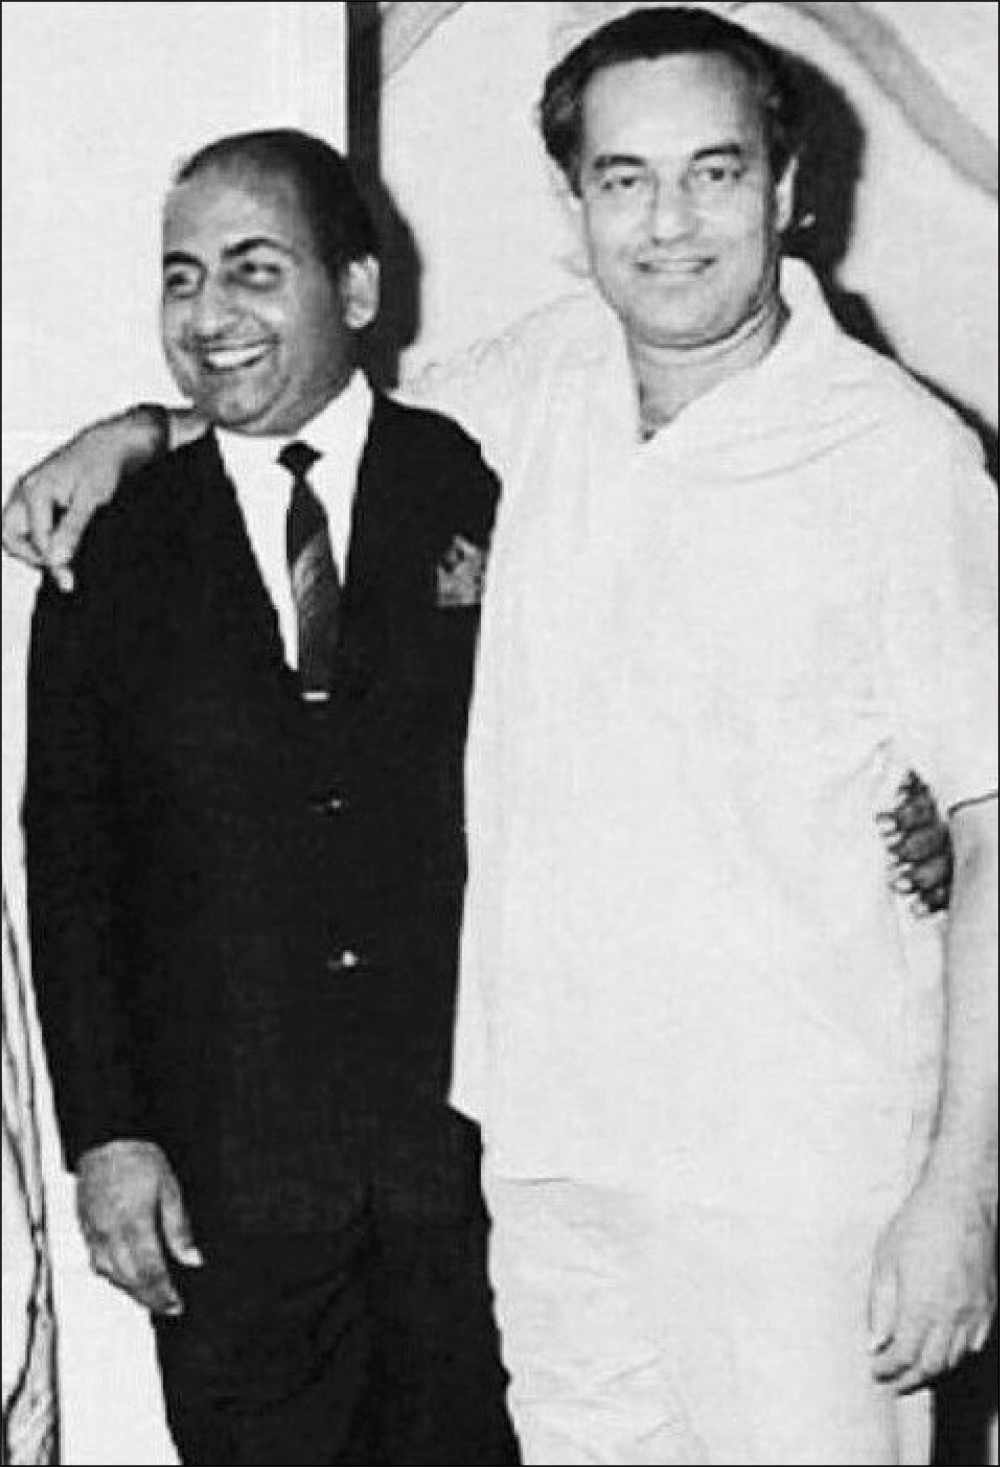 With Mohammed Rafi.